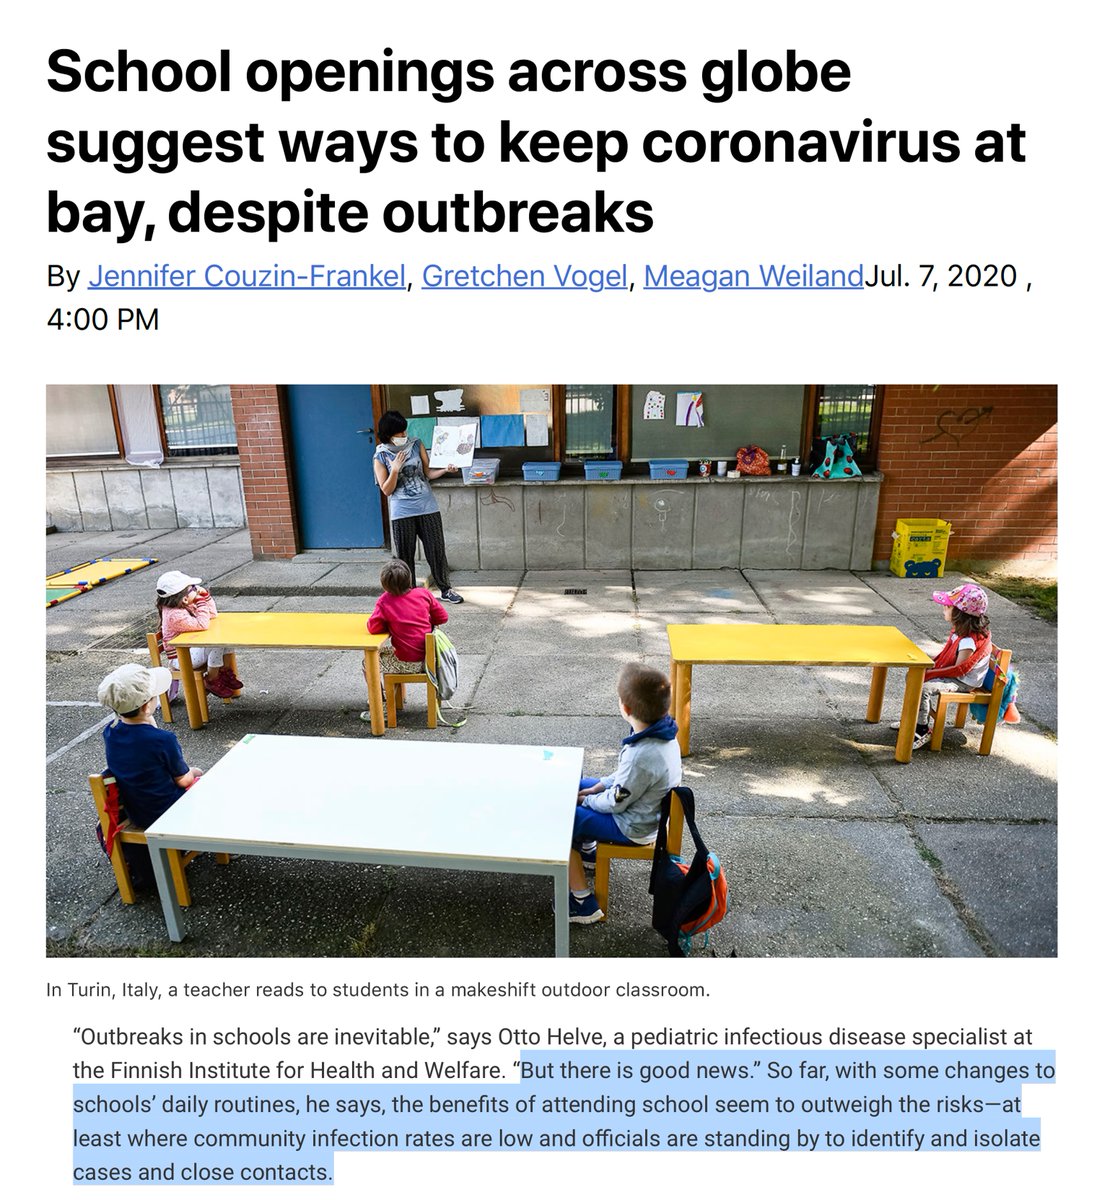 One of the most important  #COVID19 controversies: Should we reopen schools? Just out is a piece that reviews everything we know: the many outbreaks, the age gradient, distancing, masks, testing, contact tracing... https://www.sciencemag.org/news/2020/07/school-openings-across-globe-suggest-ways-keep-coronavirus-bay-despite-outbreaks by  @jcouzin  @GretchenVogel1  @MeaganWeiland